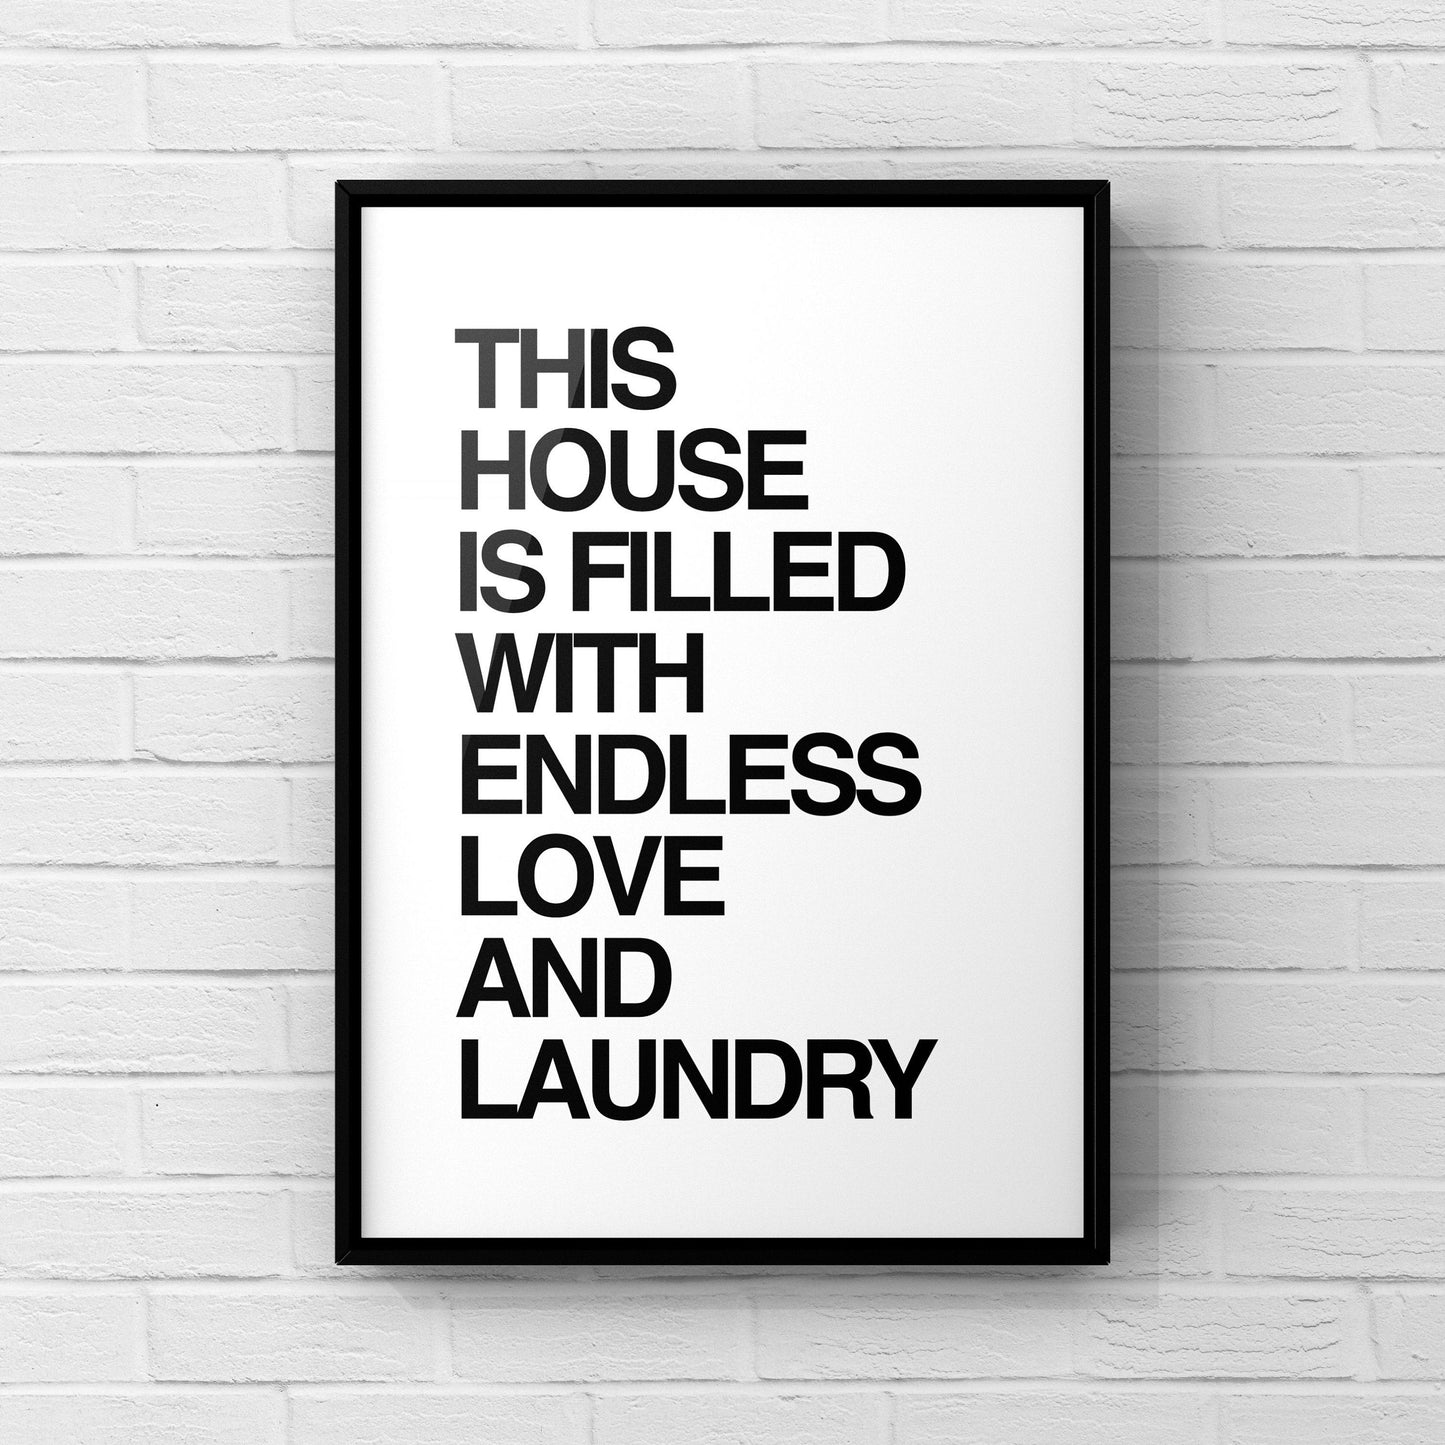 This house has endless love and laundry